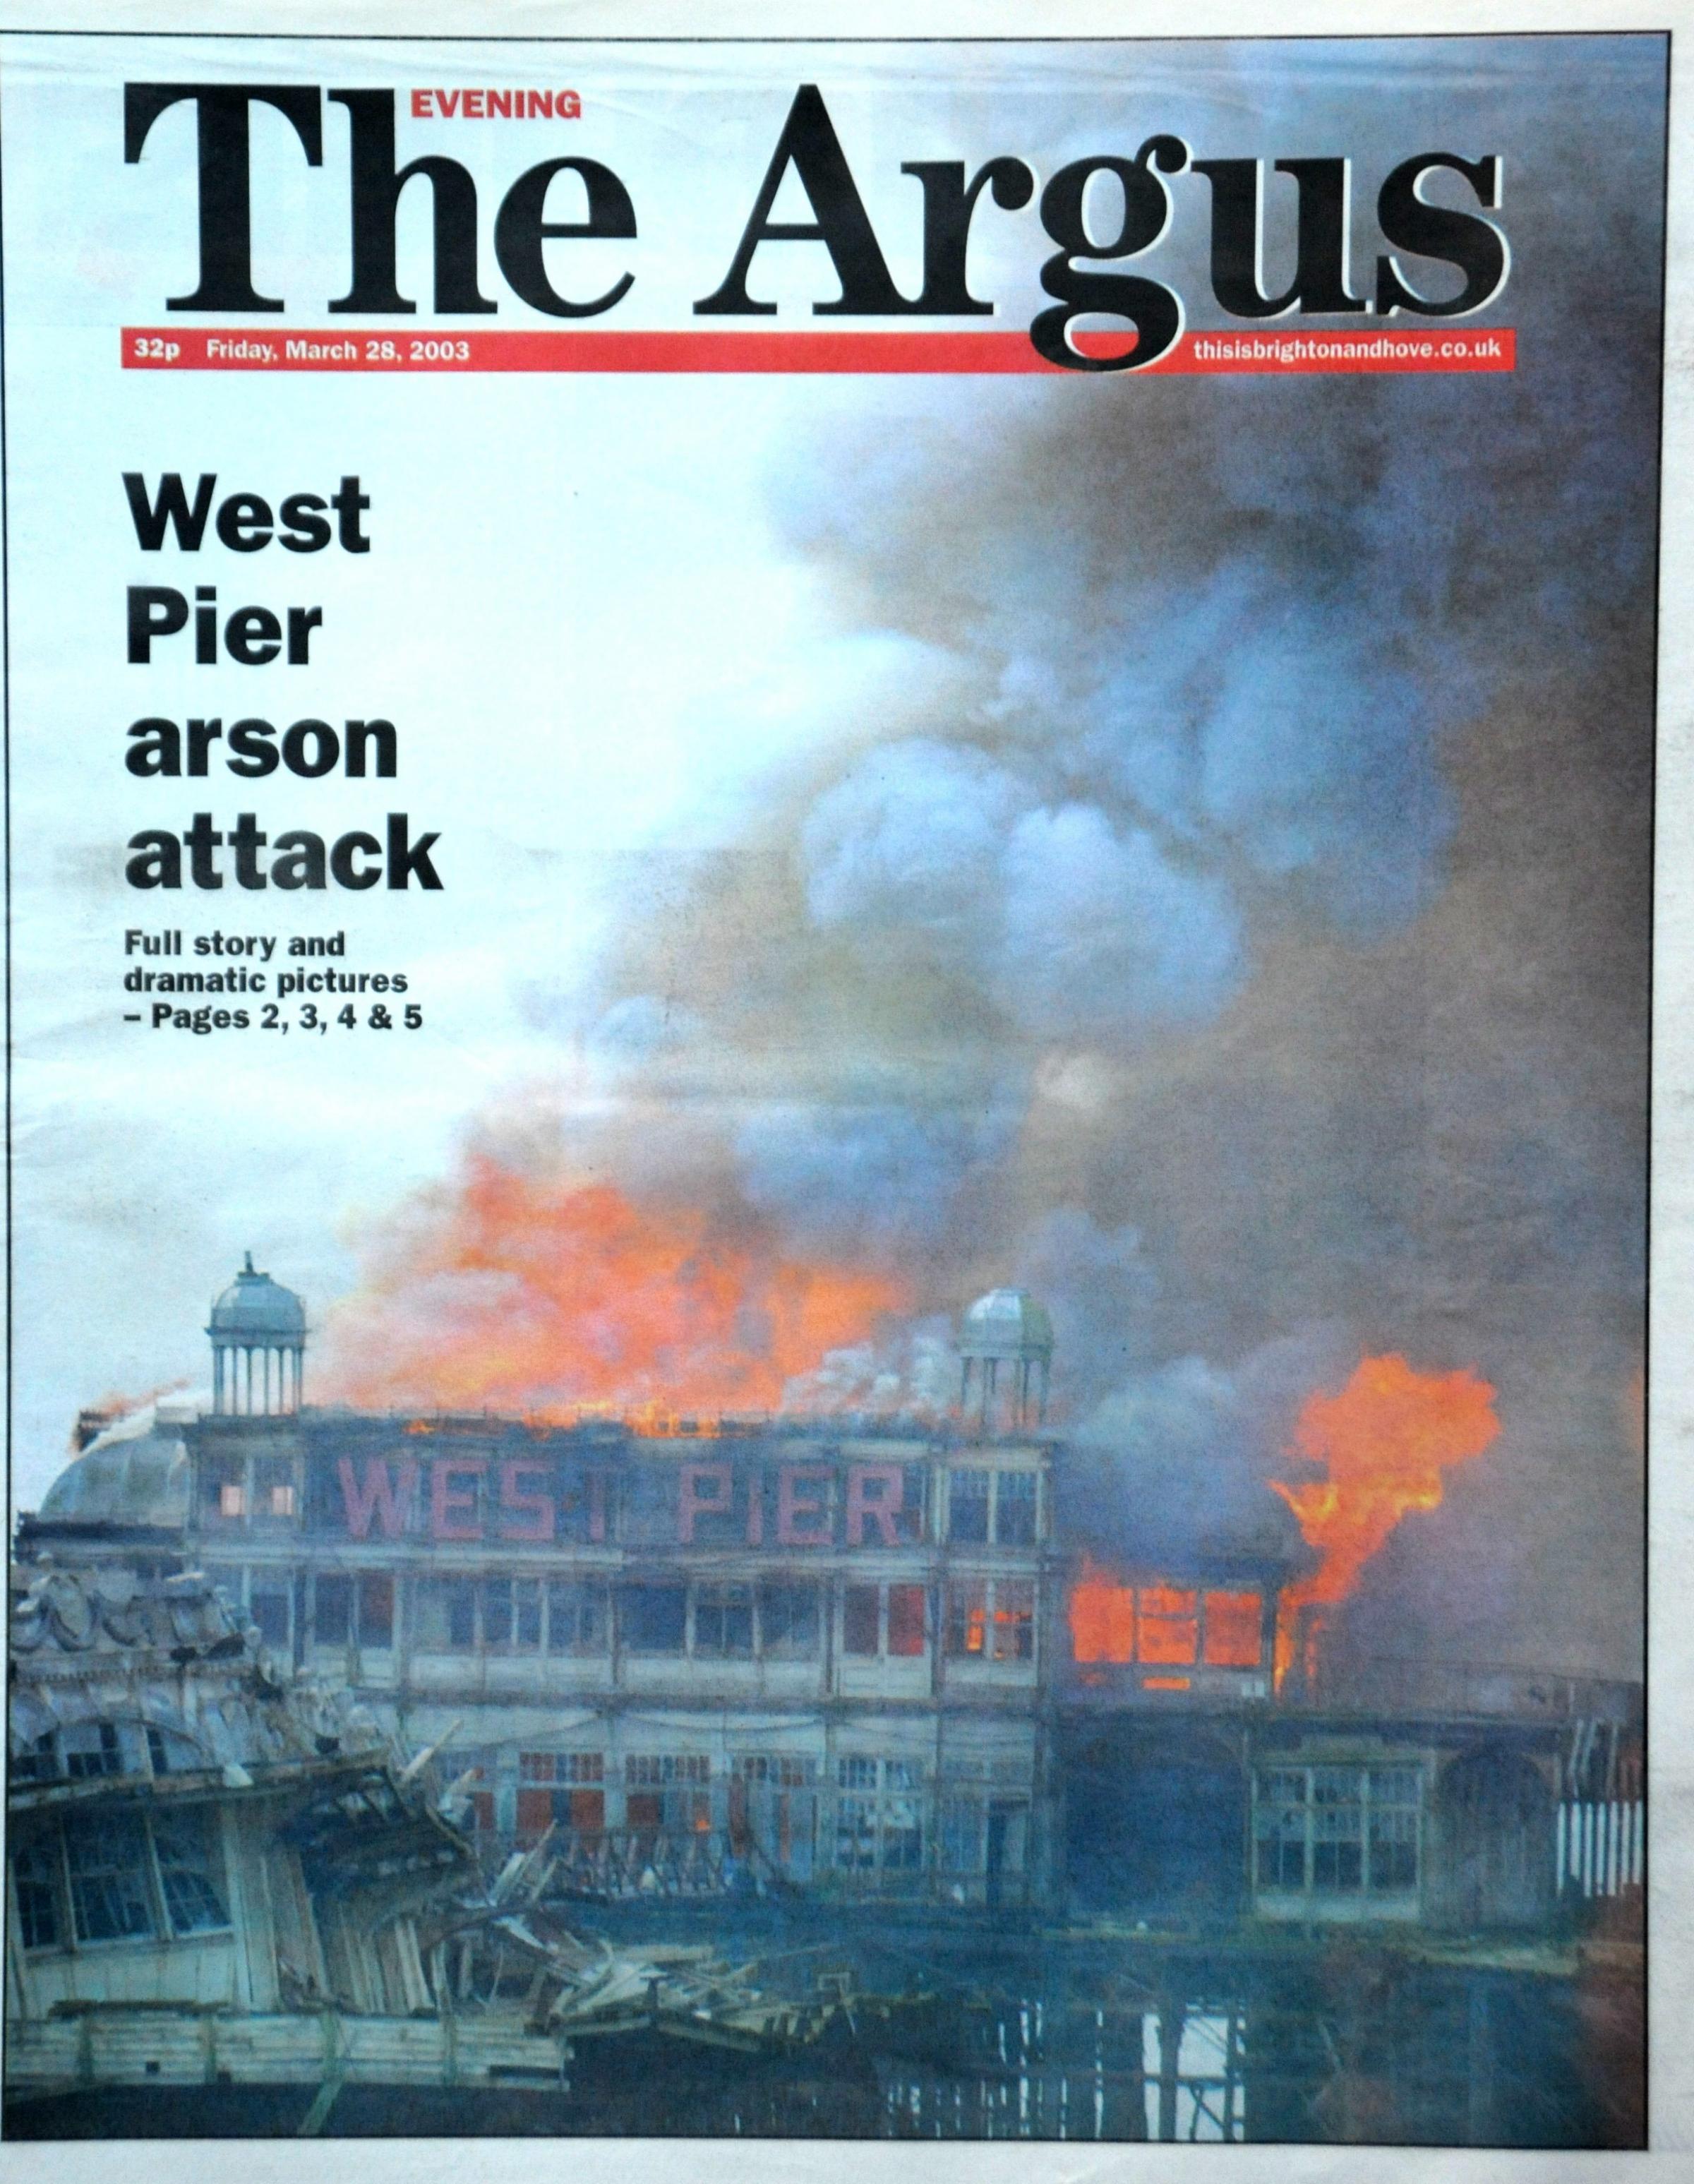 The Argus front page